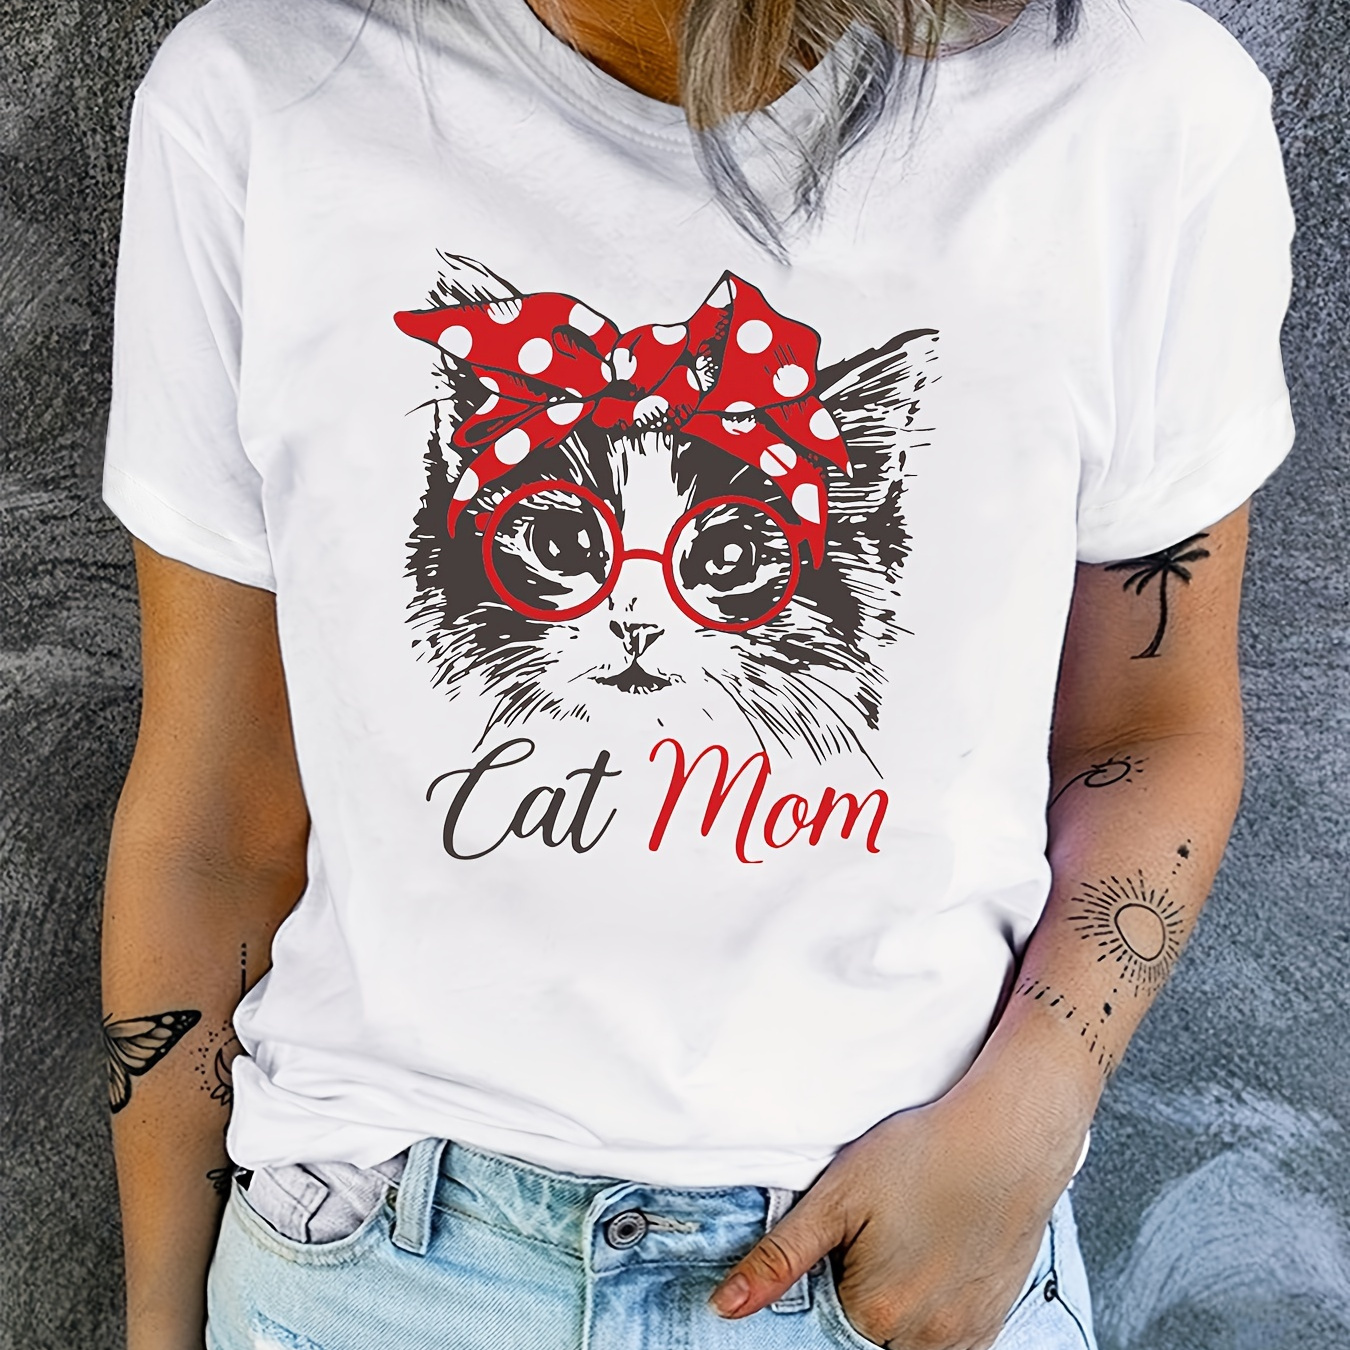 

Cat Mom Print Crew Neck T-shirt, Casual Short Sleeve T-shirt For Spring & Summer, Women's Clothing